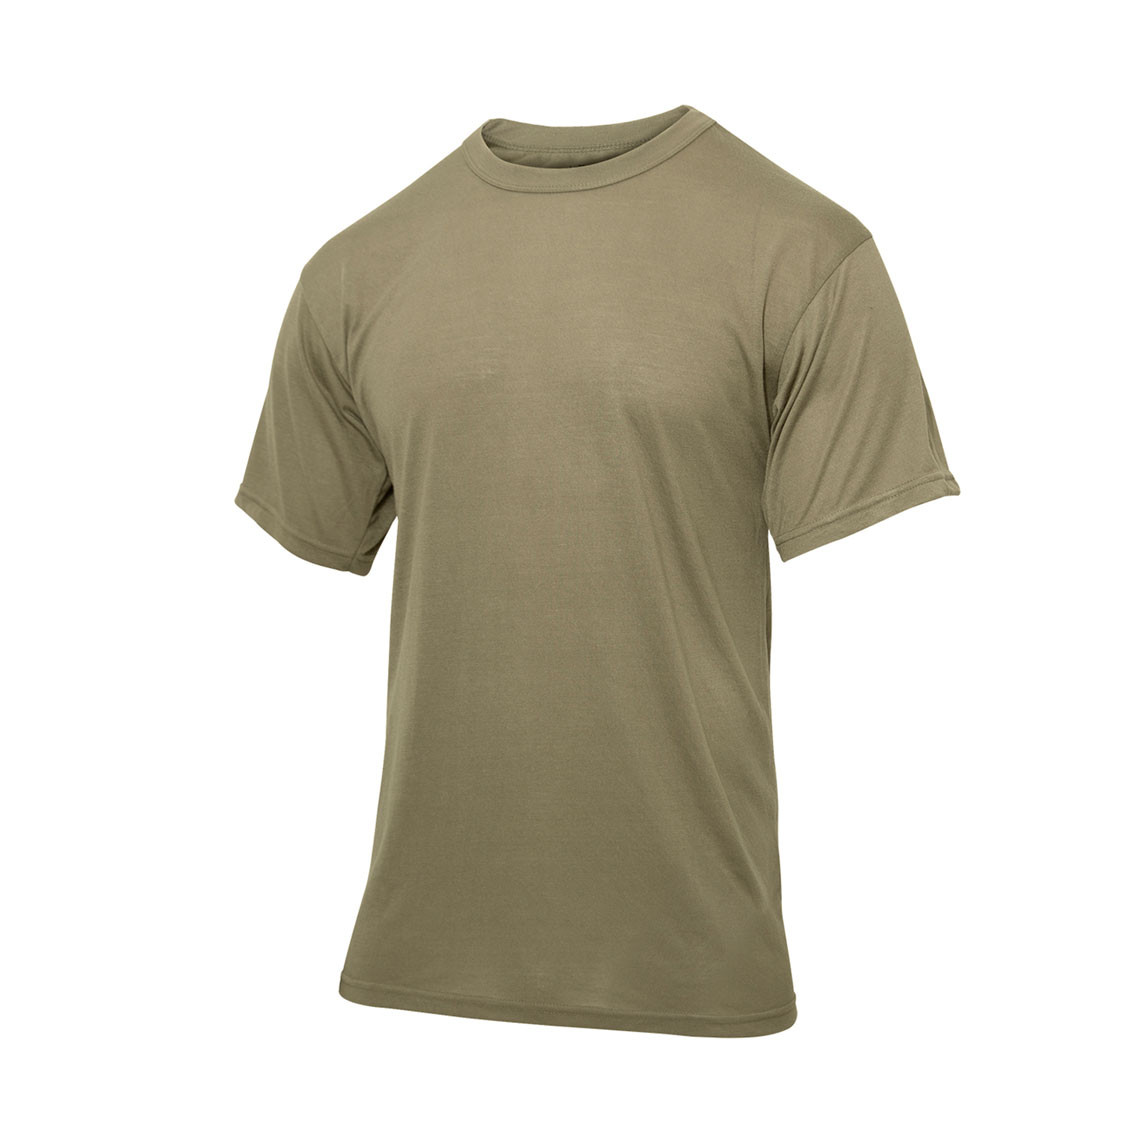 Shop Coyote Brown Moisture Wicking T Shirts - Fatigues Army Navy